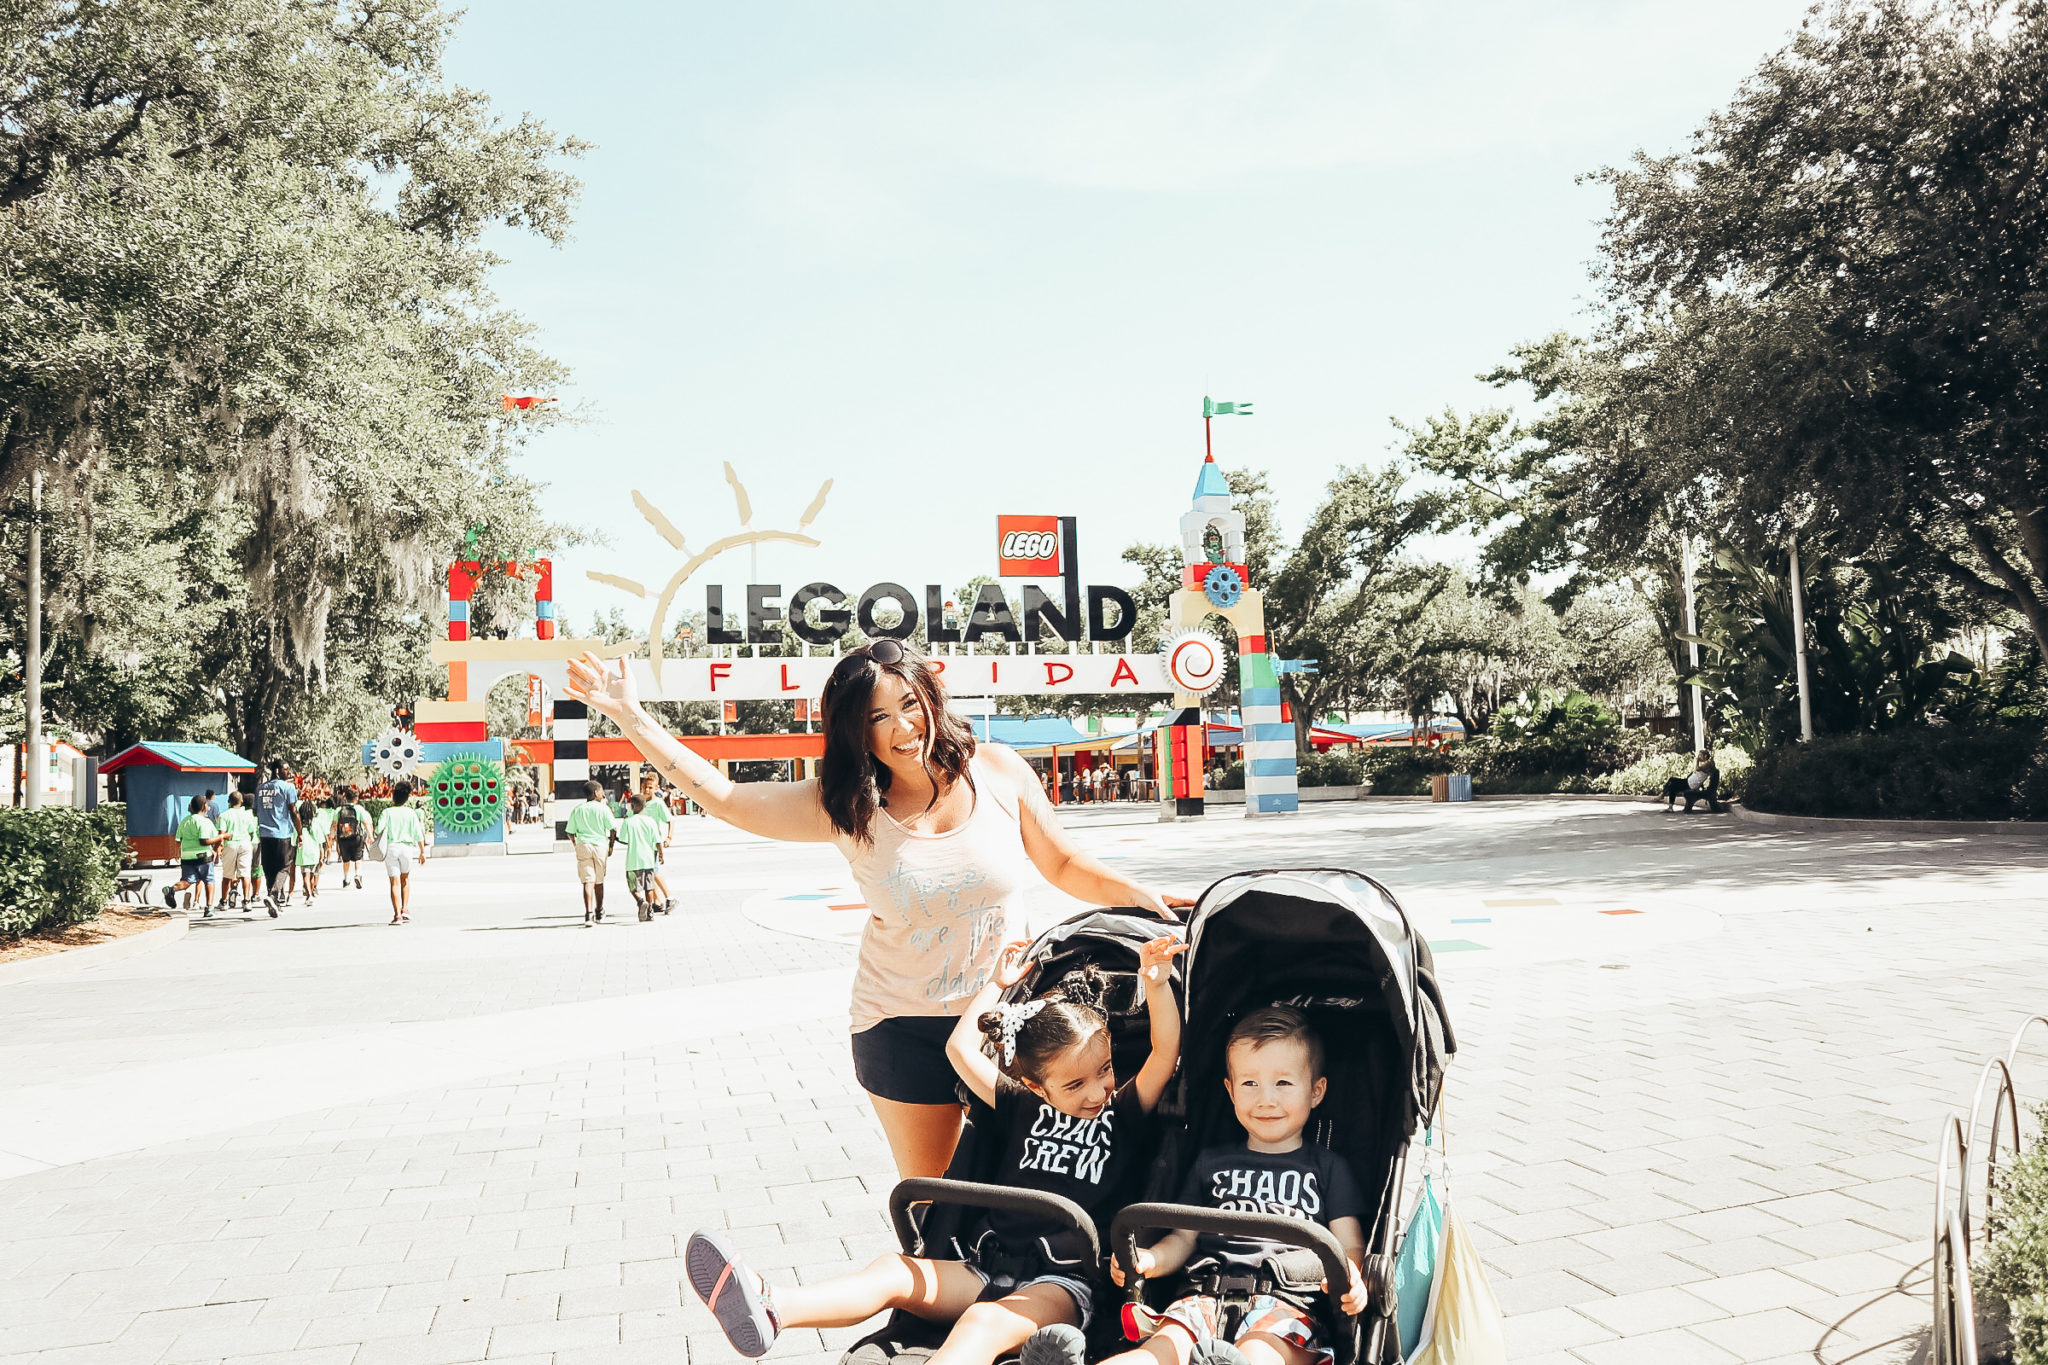 WHAT TO EXPECT TAKING TODDLERS TO LEGOLAND FLORIDA, Tampa parenting blog mothers blog motherhood blog Florida travel blogger travel influencer healthy mom blogger spring hill florida lifestyle parenting blog best mom blog 2018 Disney blogger Disney travel blogger Orlando travel blogger Orlando mom blogger Orlando Instagram influencer